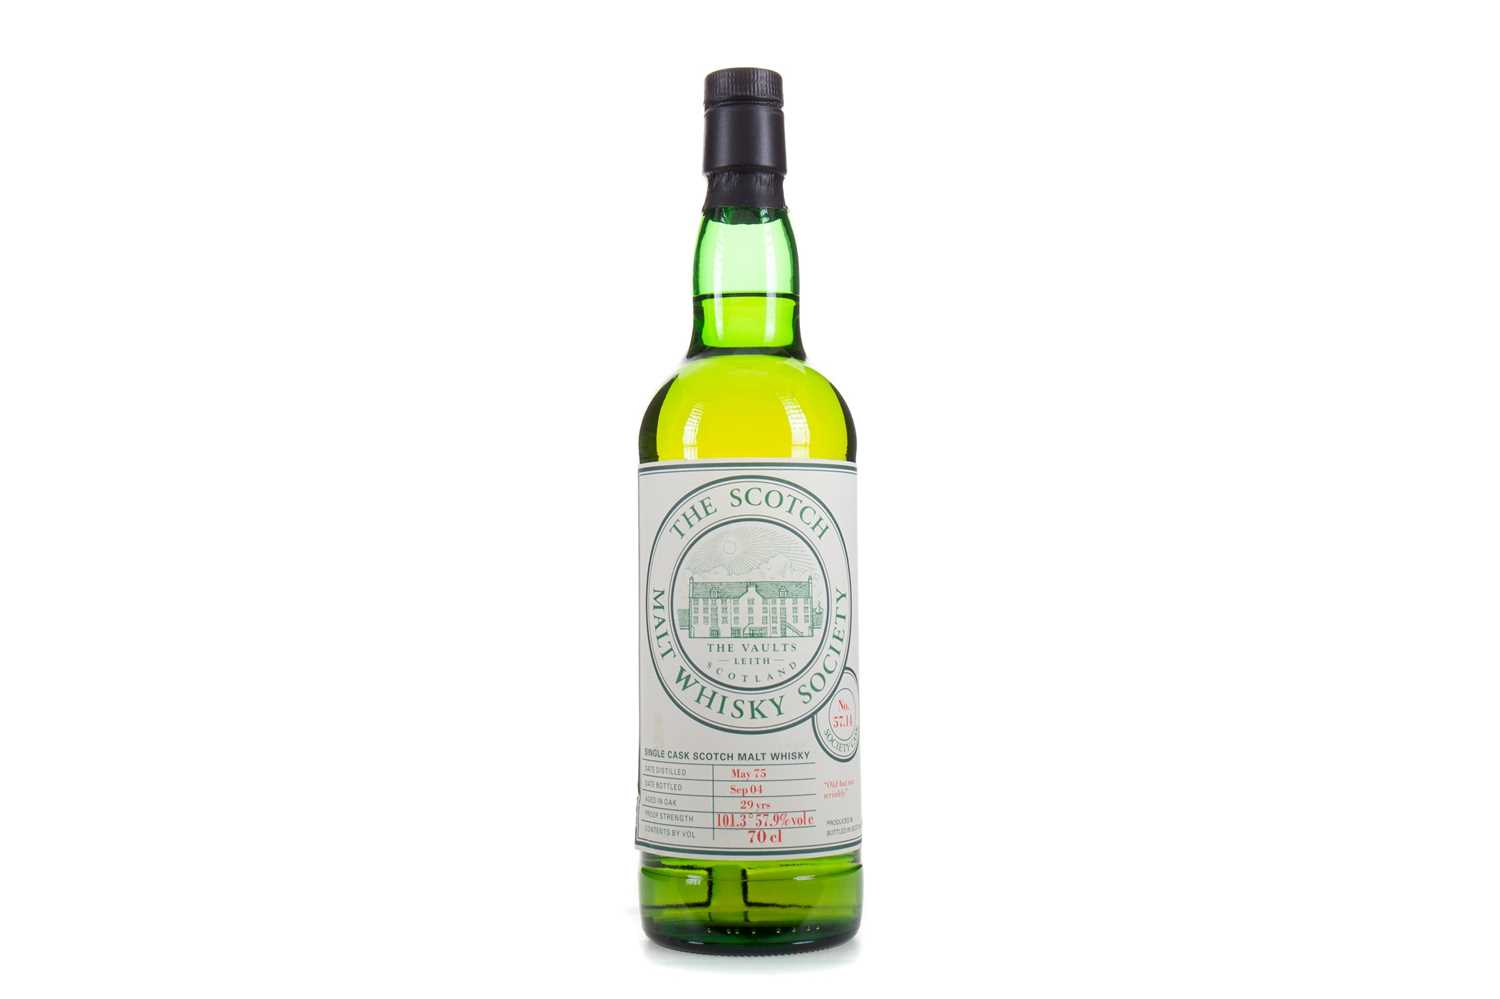 Lot 563 - SMWS 57.14 GLEN MHOR 1975 29 YEAR OLD